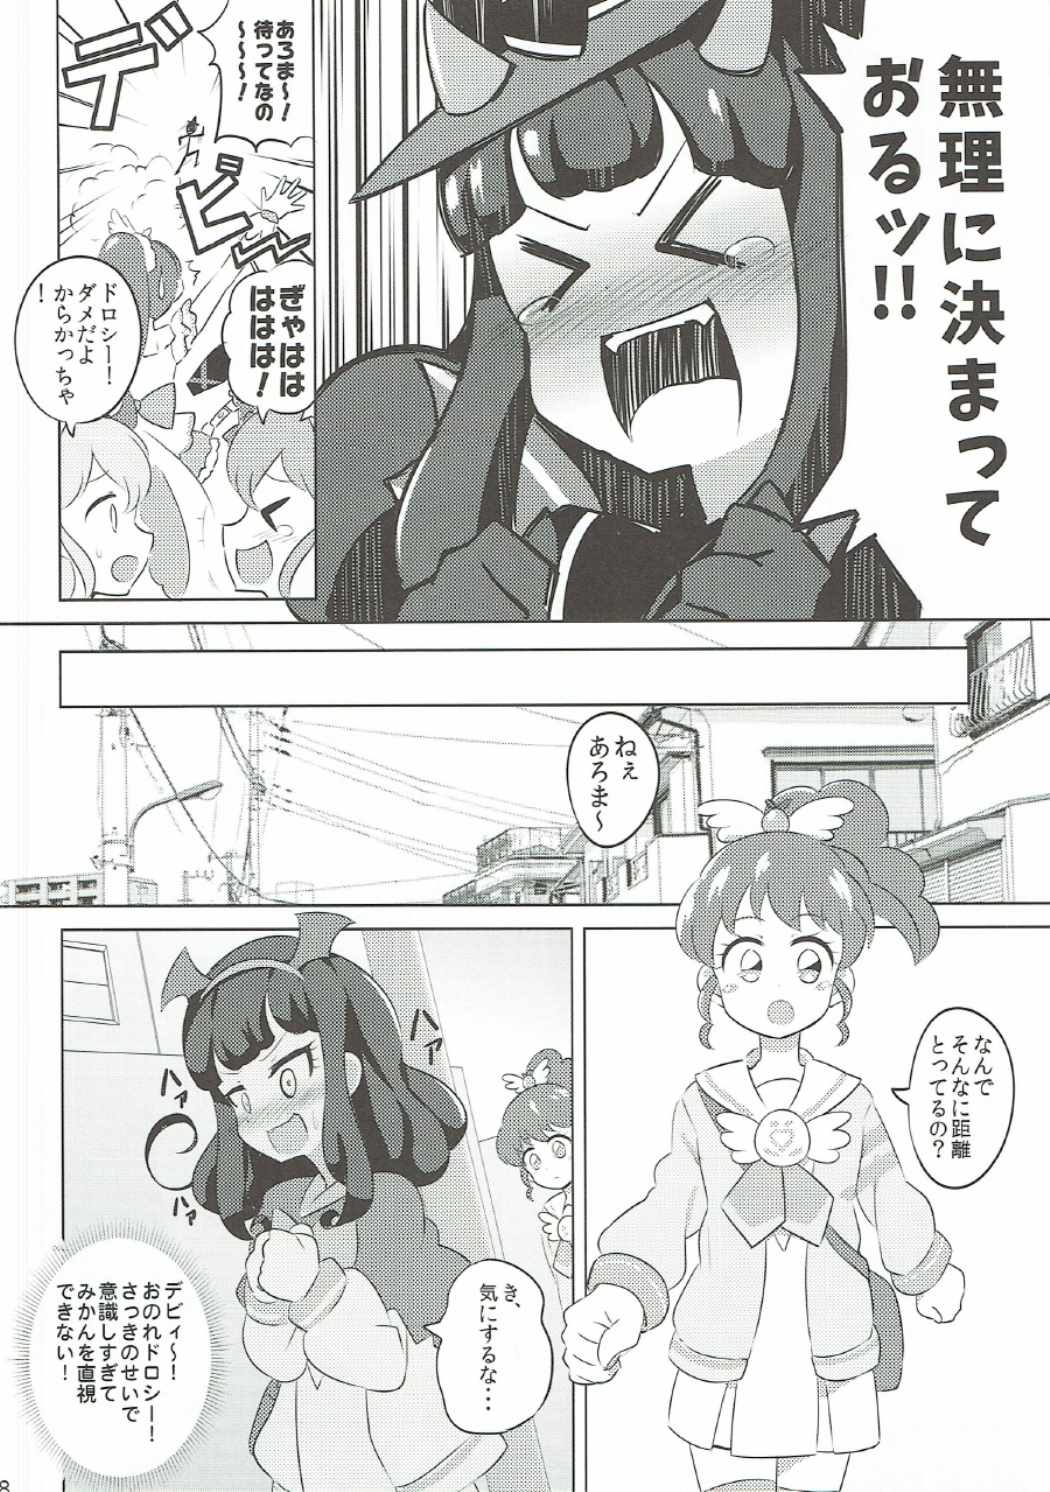 (On the Stage 5) [Gake no Ue no Aho (AHO)] The Gaarmagedon Times (PriPara) page 17 full